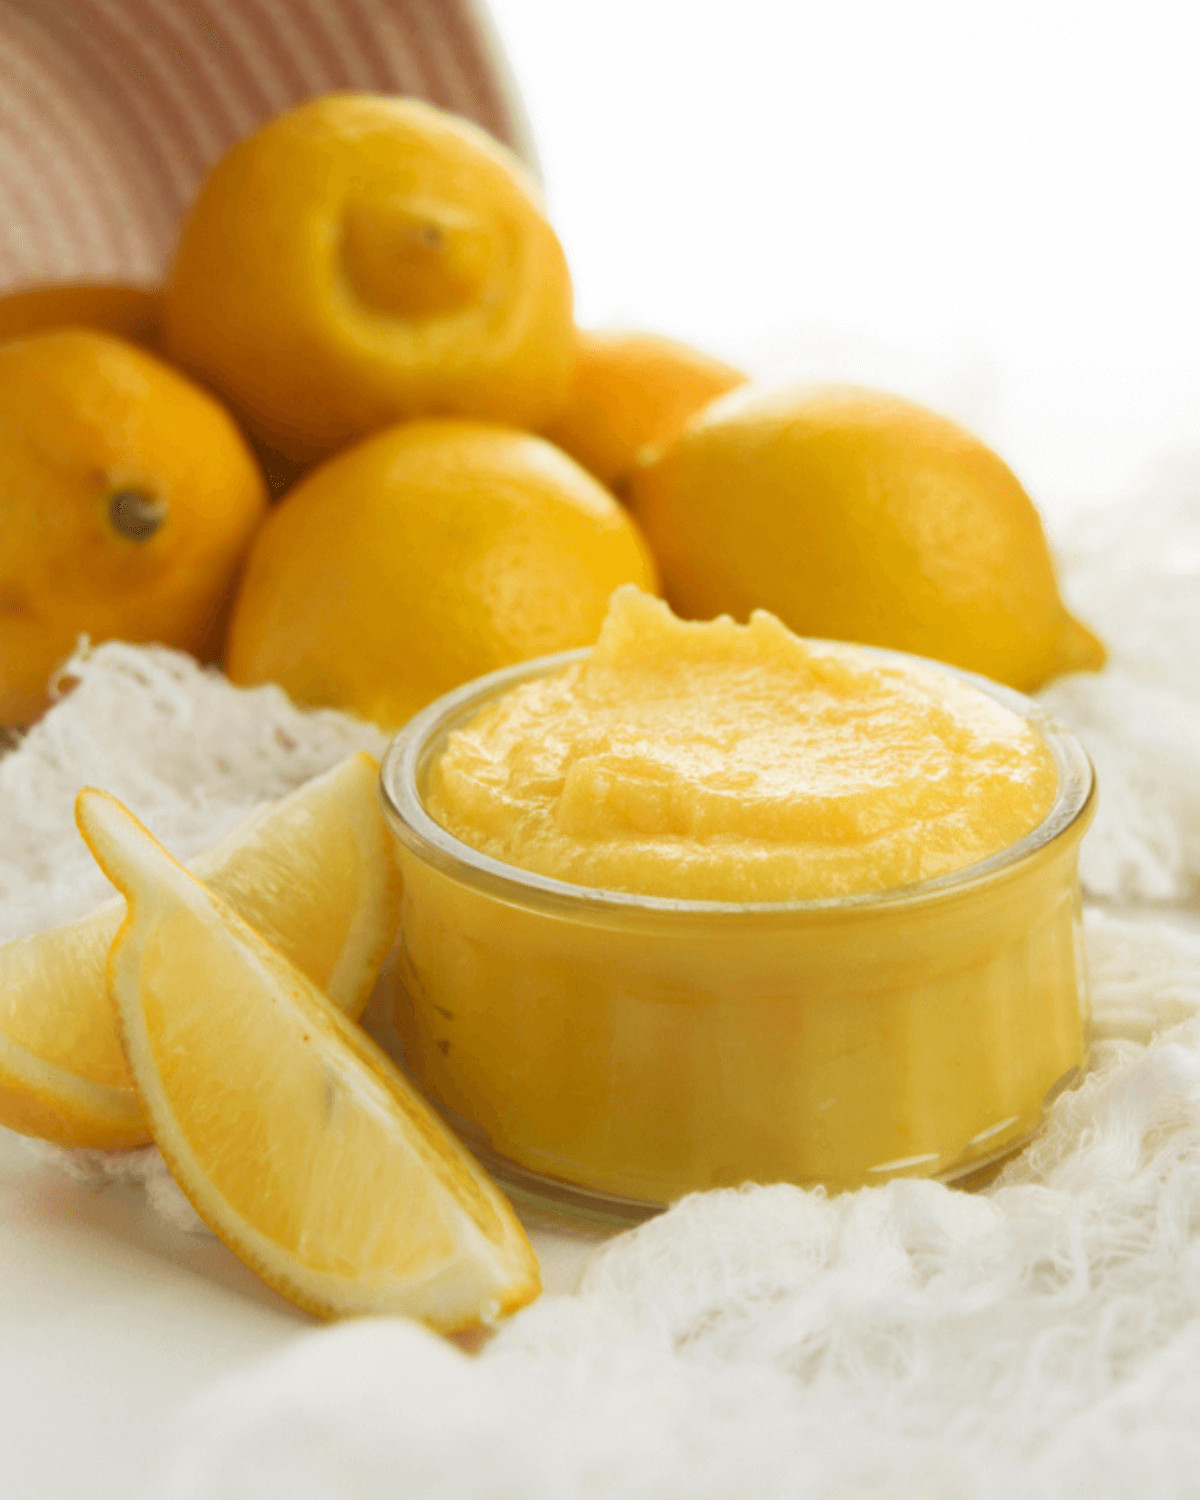 A pile of lemons with a bowl of the curd.